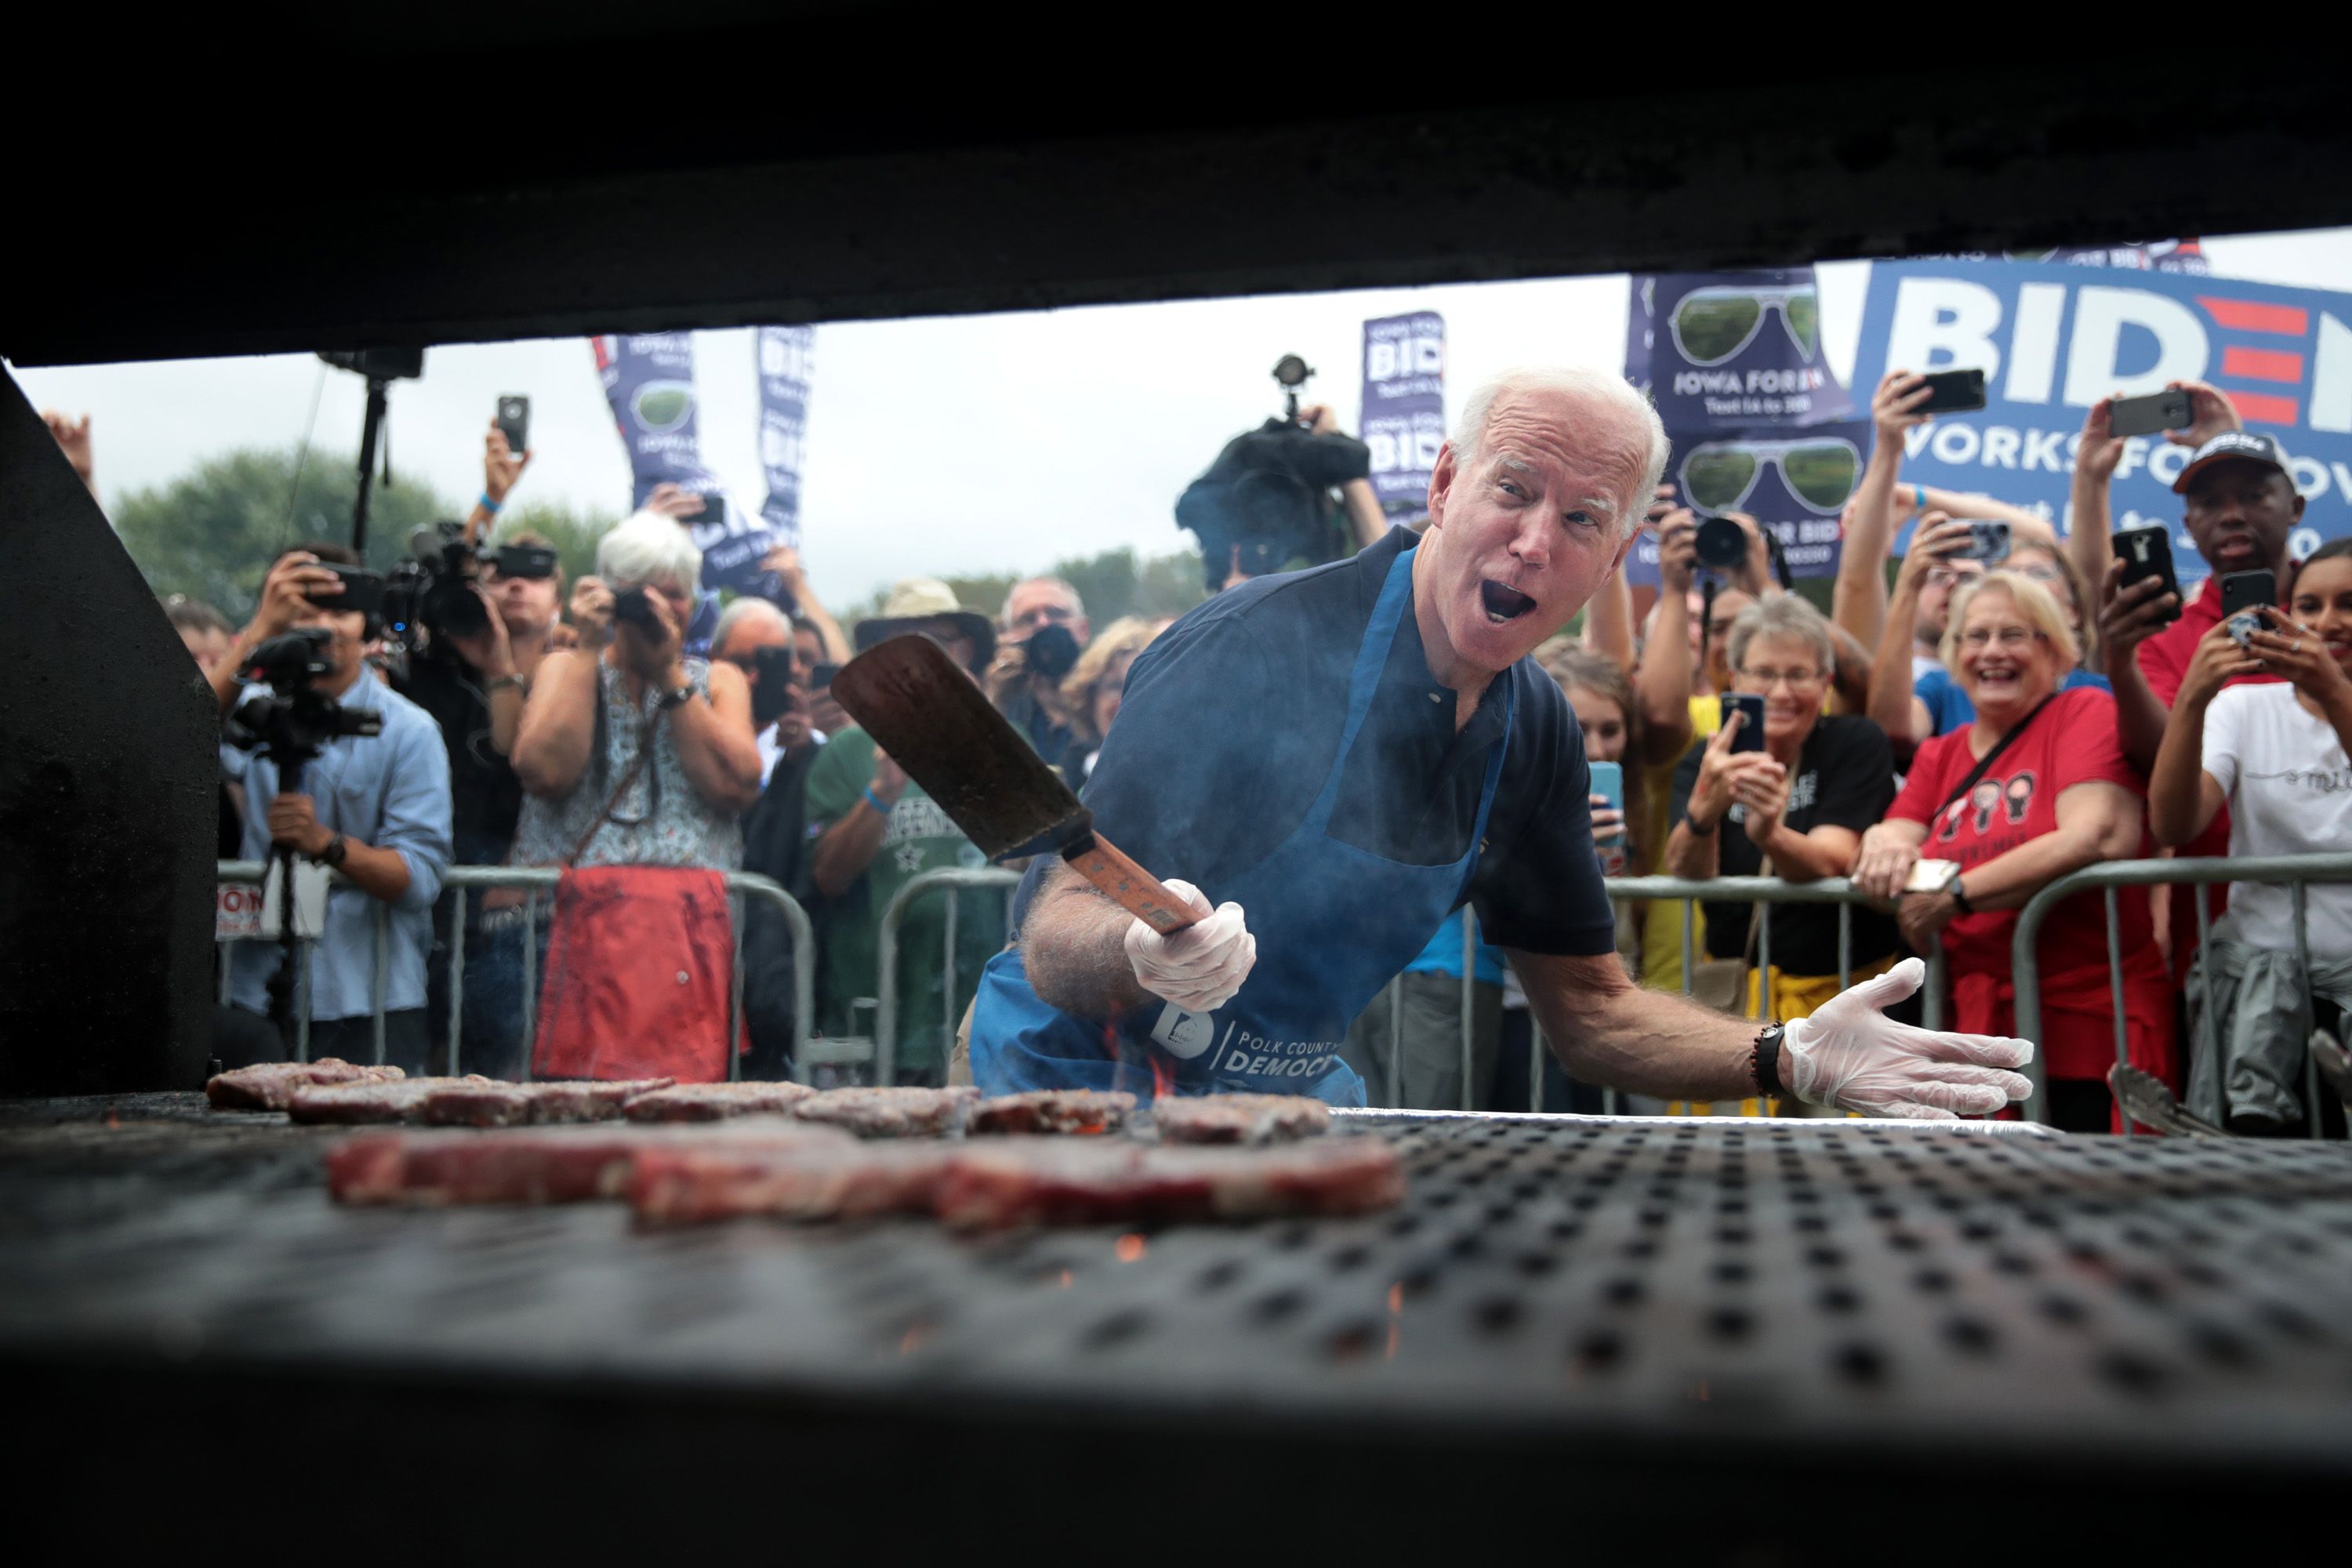 Democratic presidential candidate, former Vice President Joe Biden works the grill at the Polk County Democrats' Steak Fry on September 21